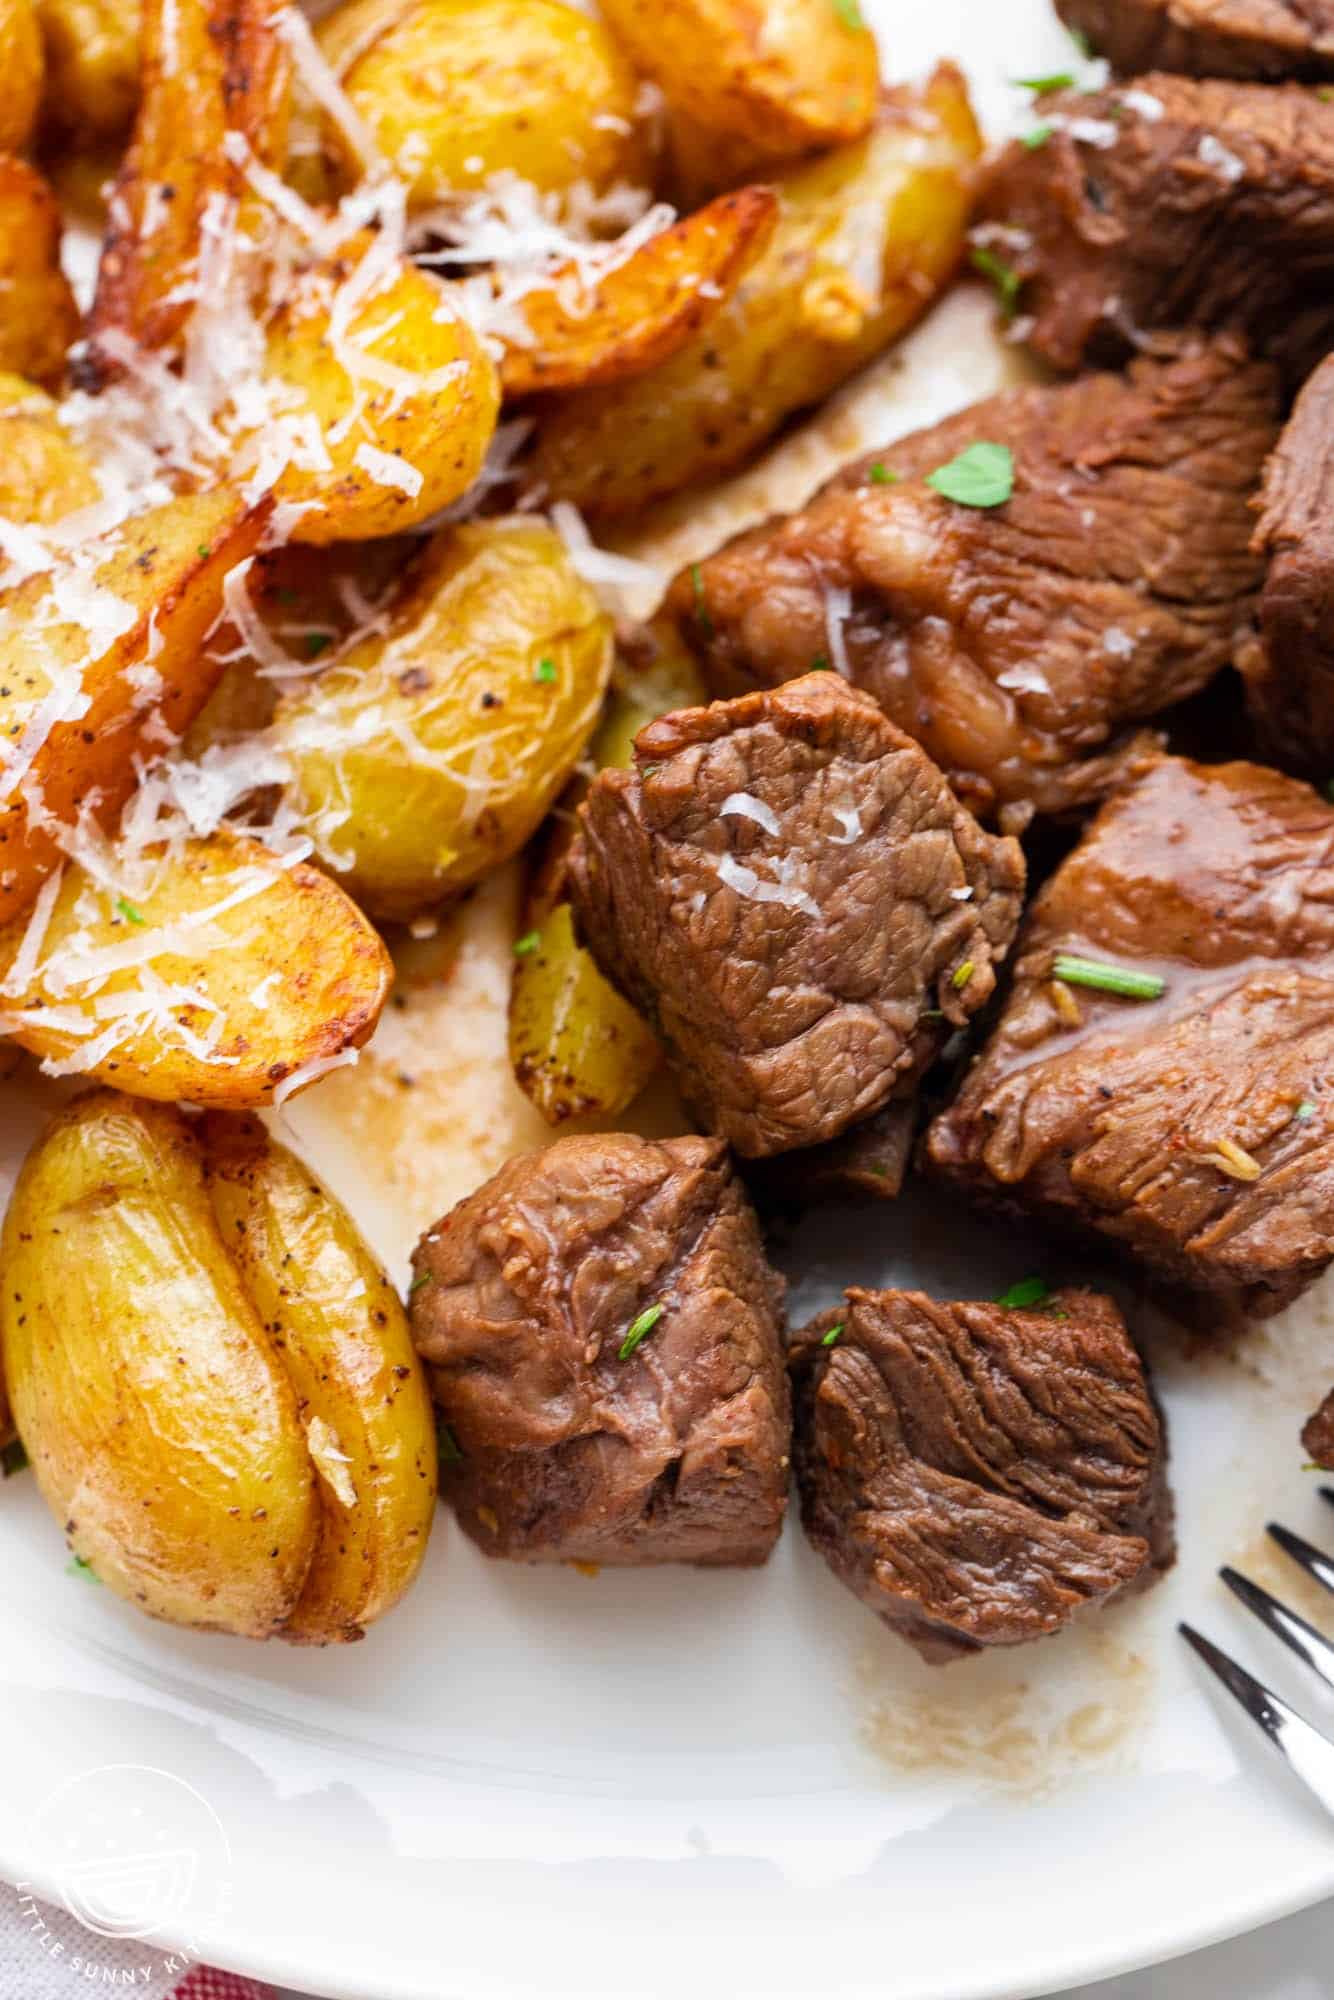 steak bites and potatoes with parmesan cheese on a dinner plate.